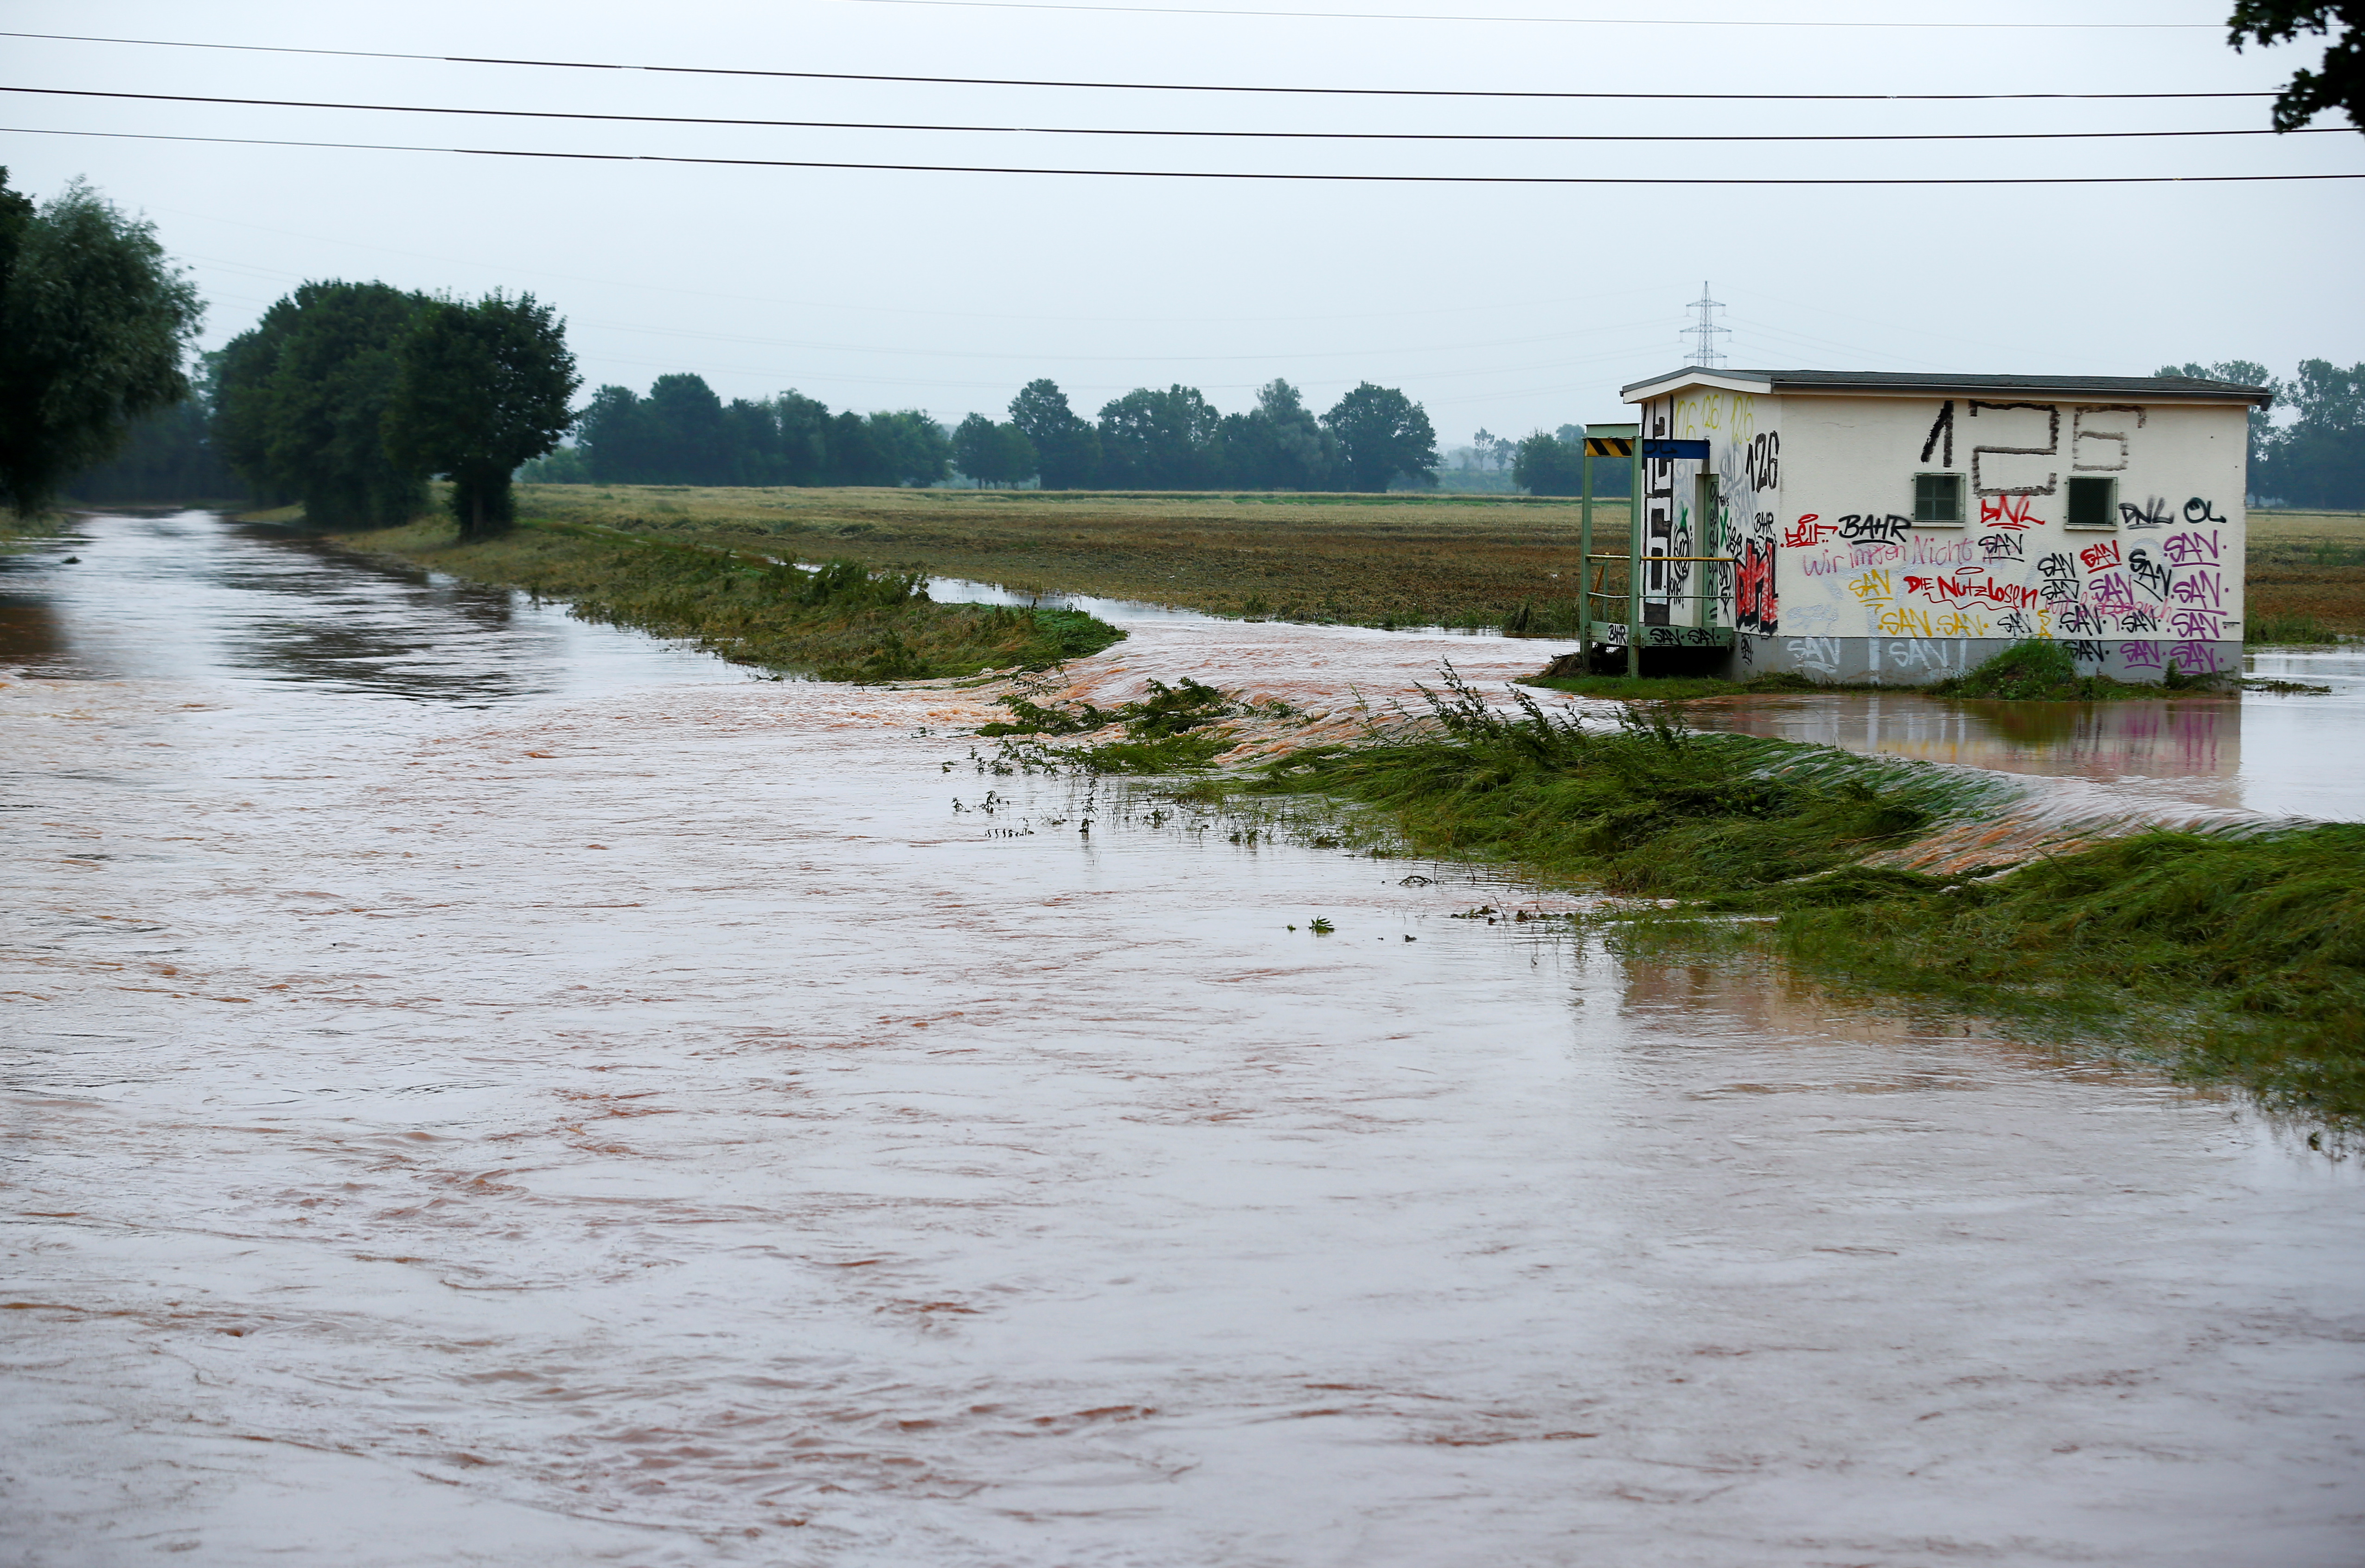 Aftermath of heavy rainfalls in Germany